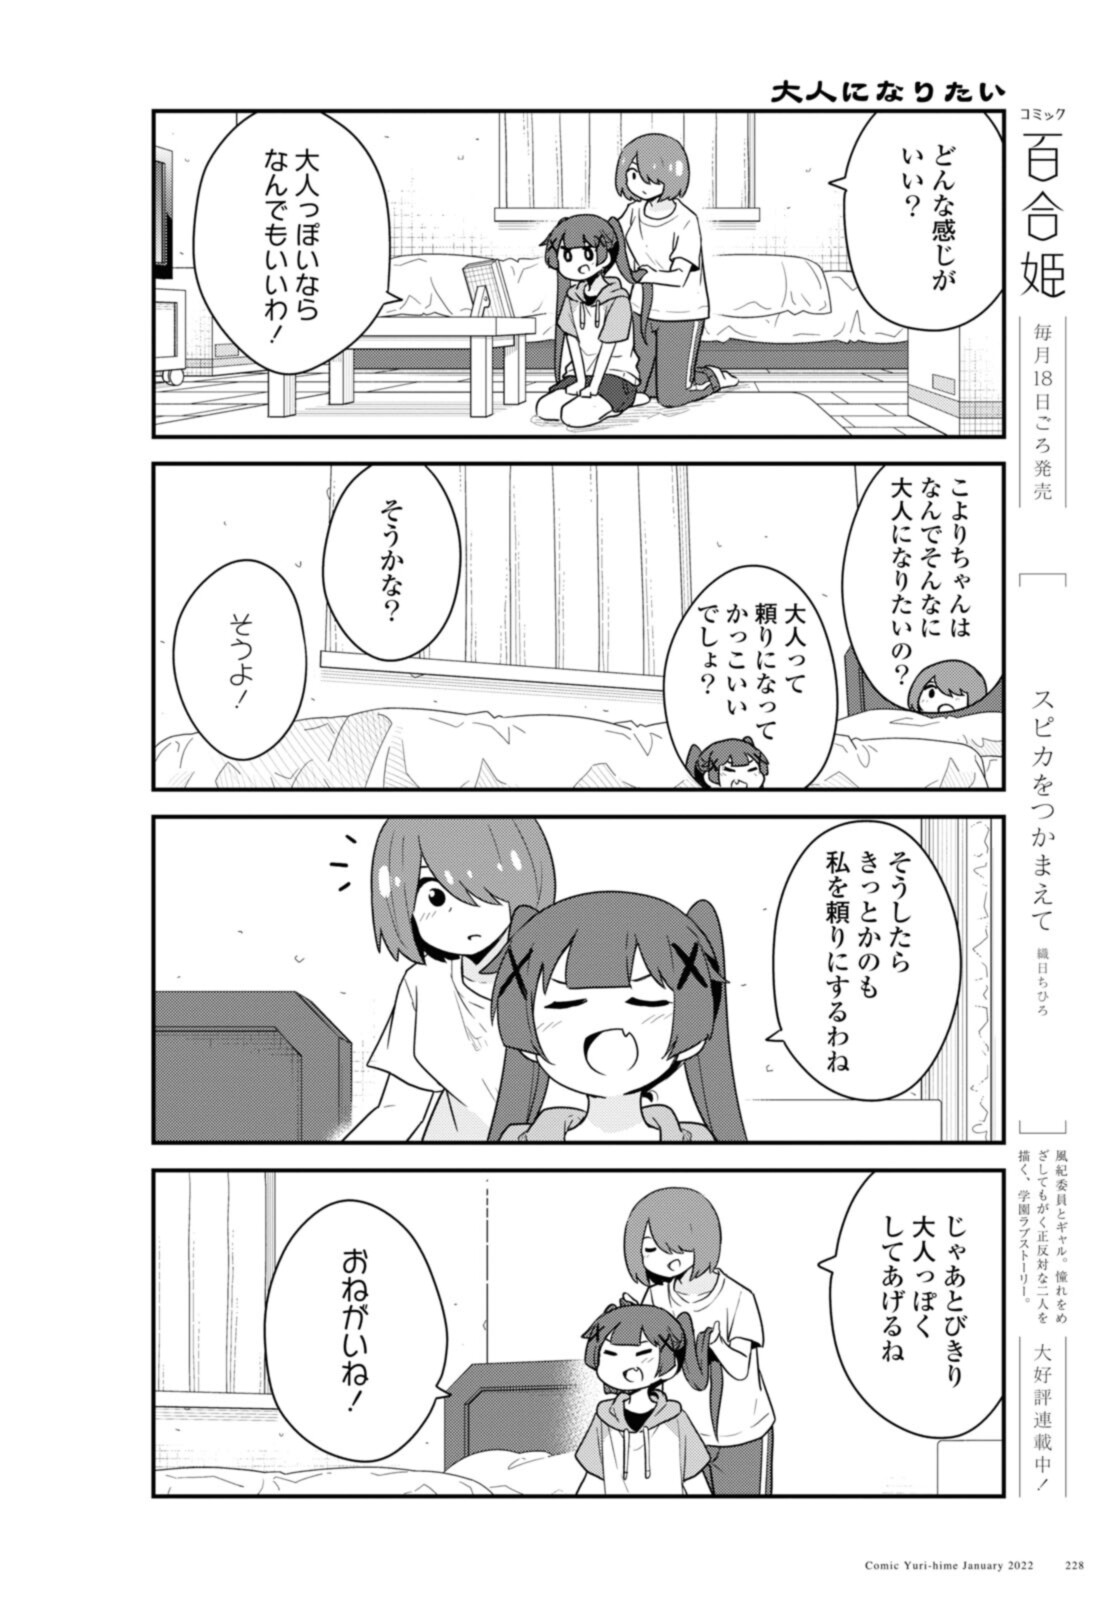 Wataten! An Angel Flew Down to Me 私に天使が舞い降りた！ 第91話 - Page 8